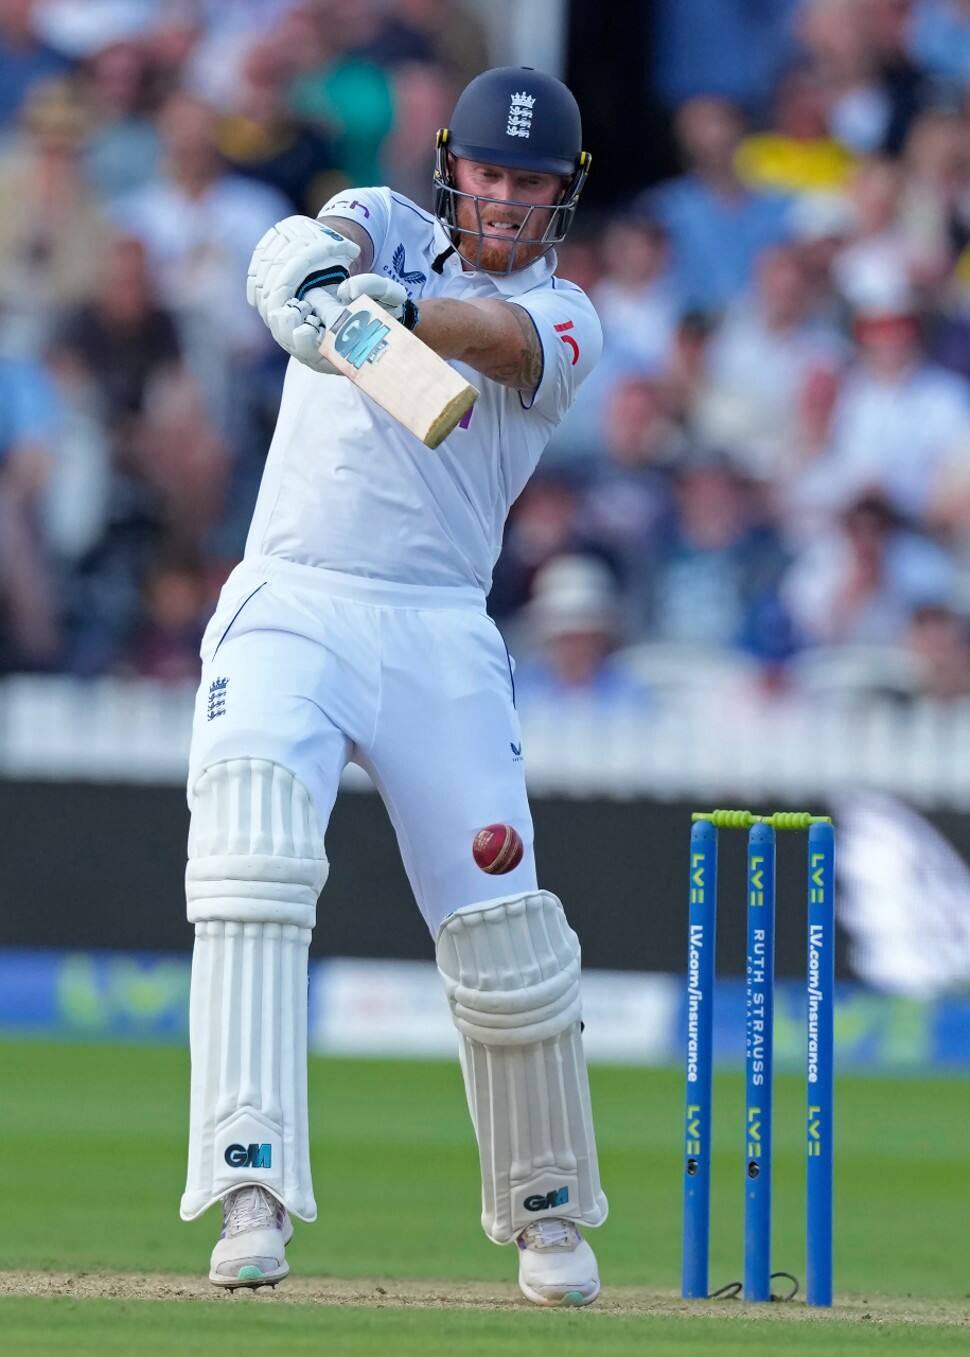 England all-rounder Ben Stokes smashed an unbeaten 135 not out against Australia in a Ashes Test at Headingley to help his side chase down 362 to win in the final innings in 2019. England won the game by 1 wicket. (Photo: AP)